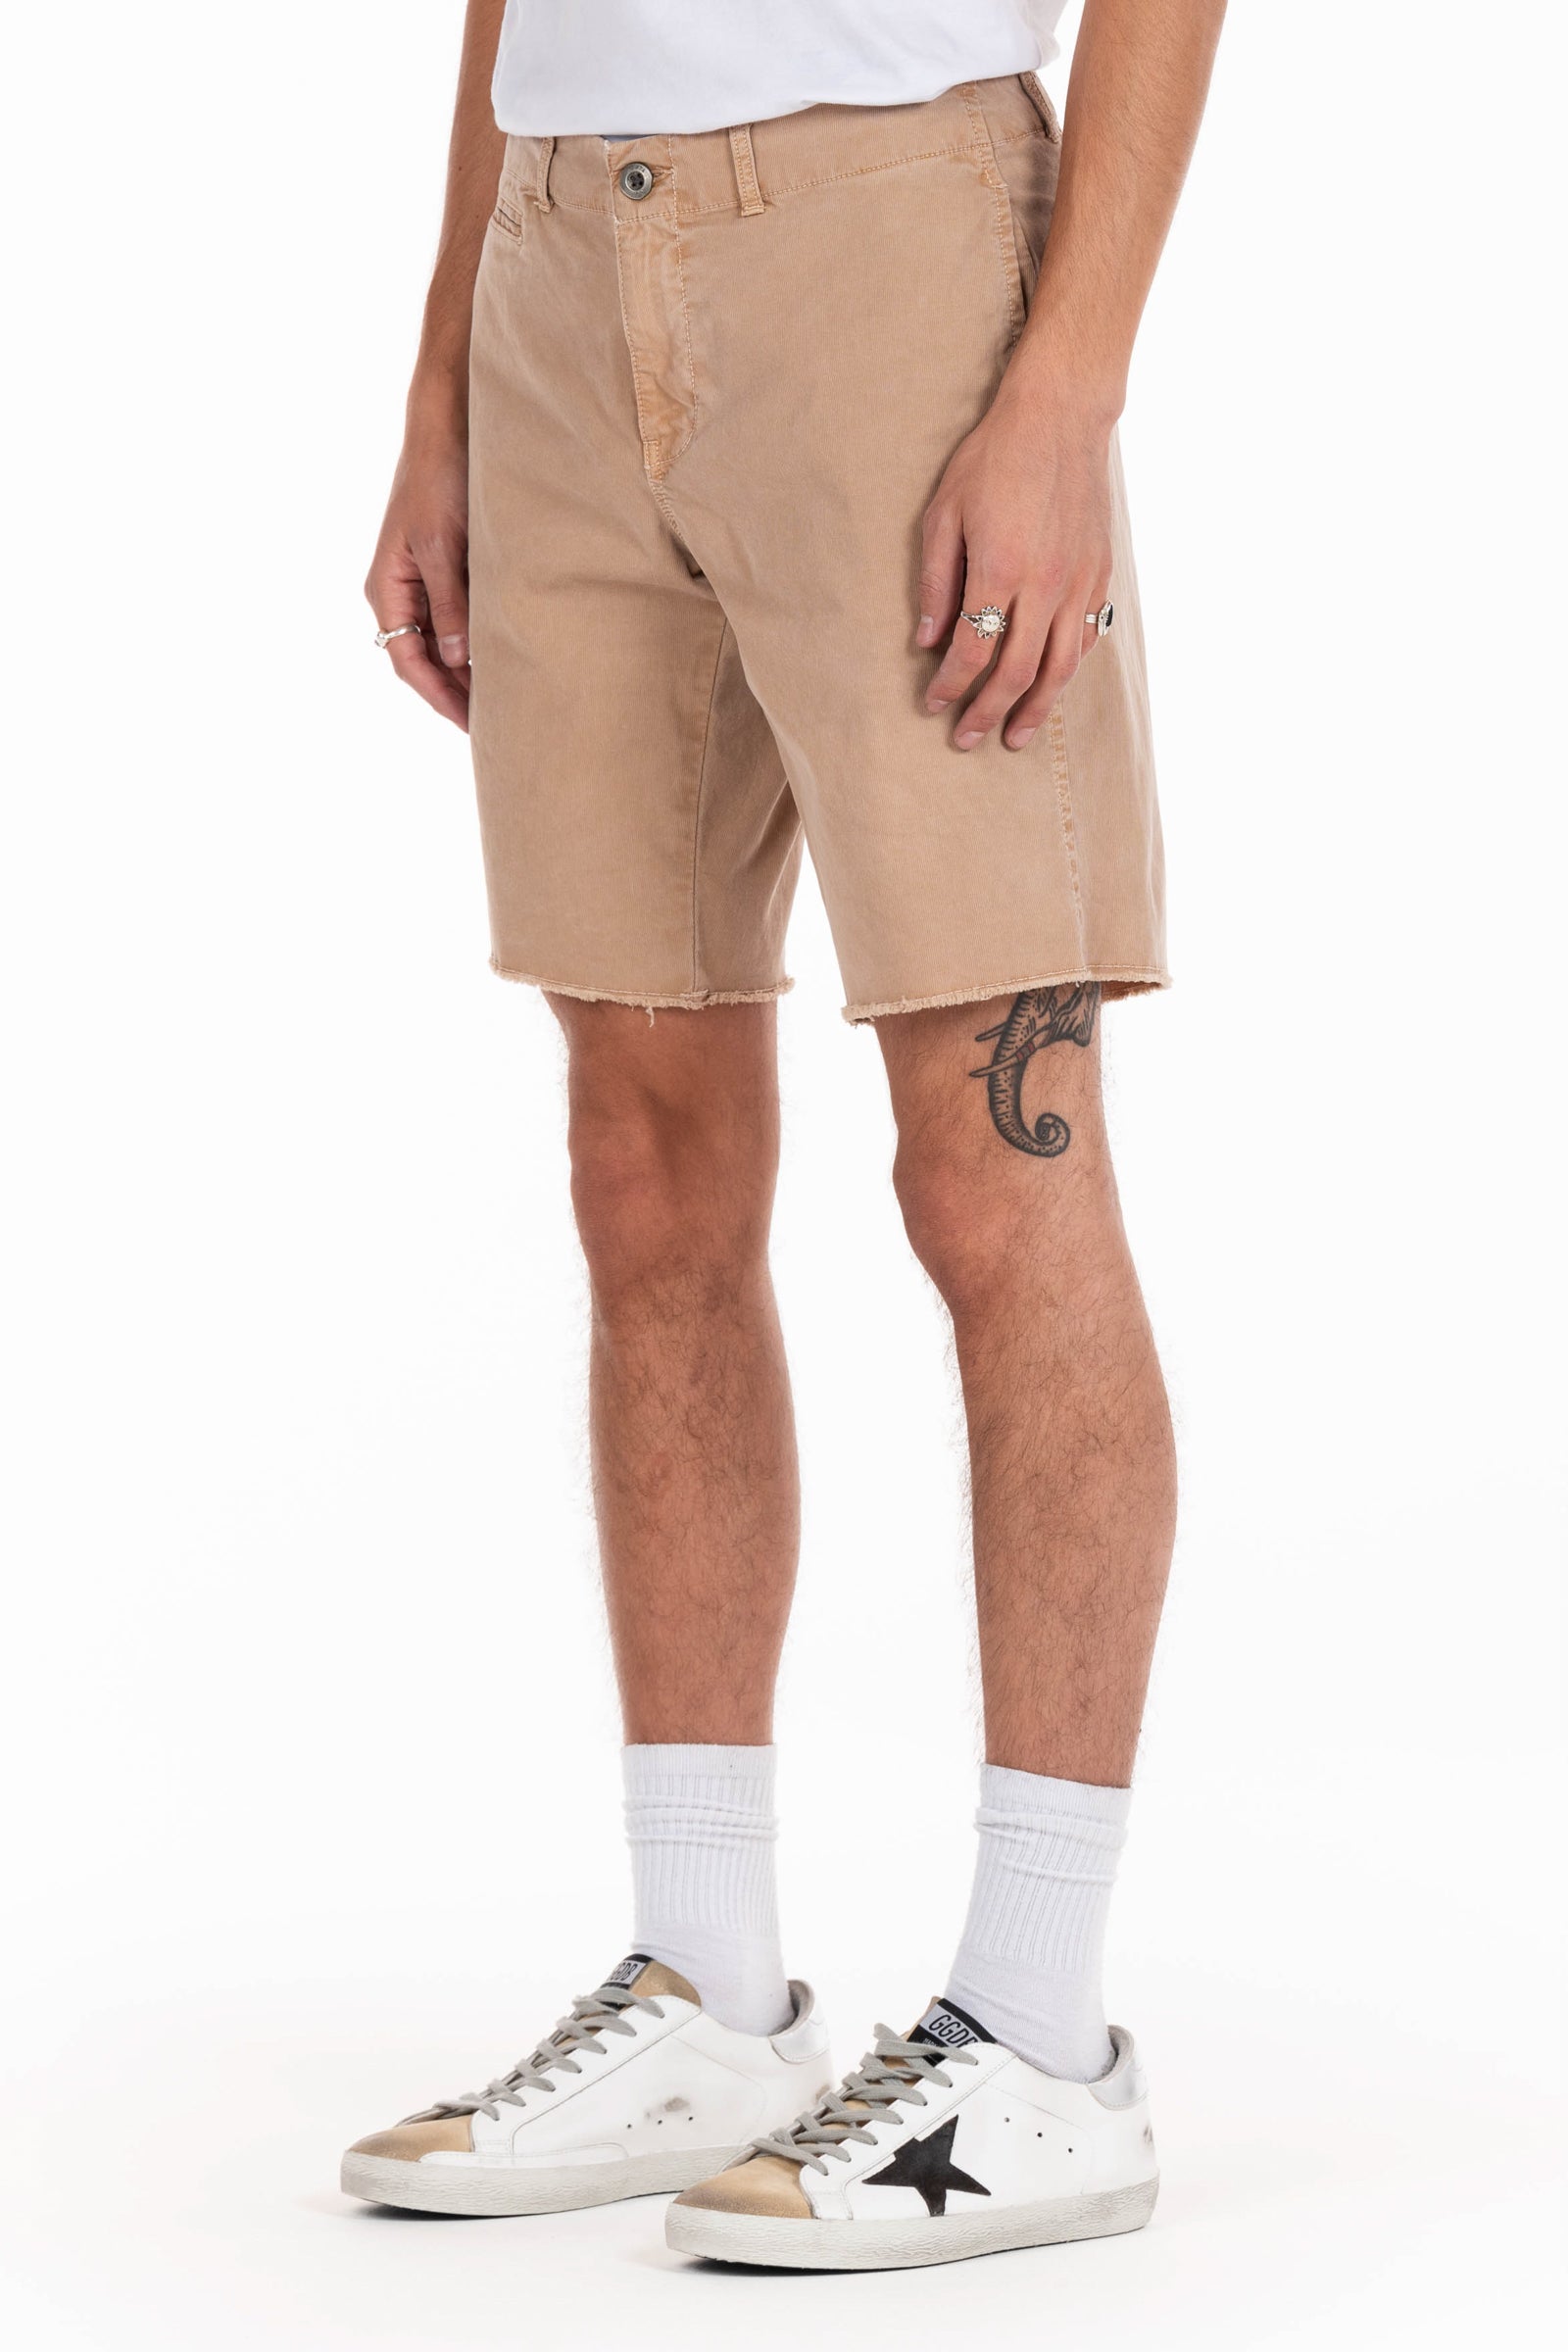 Original Paperbacks Rockland Chino Short in Khaki on Model Cropped Side View